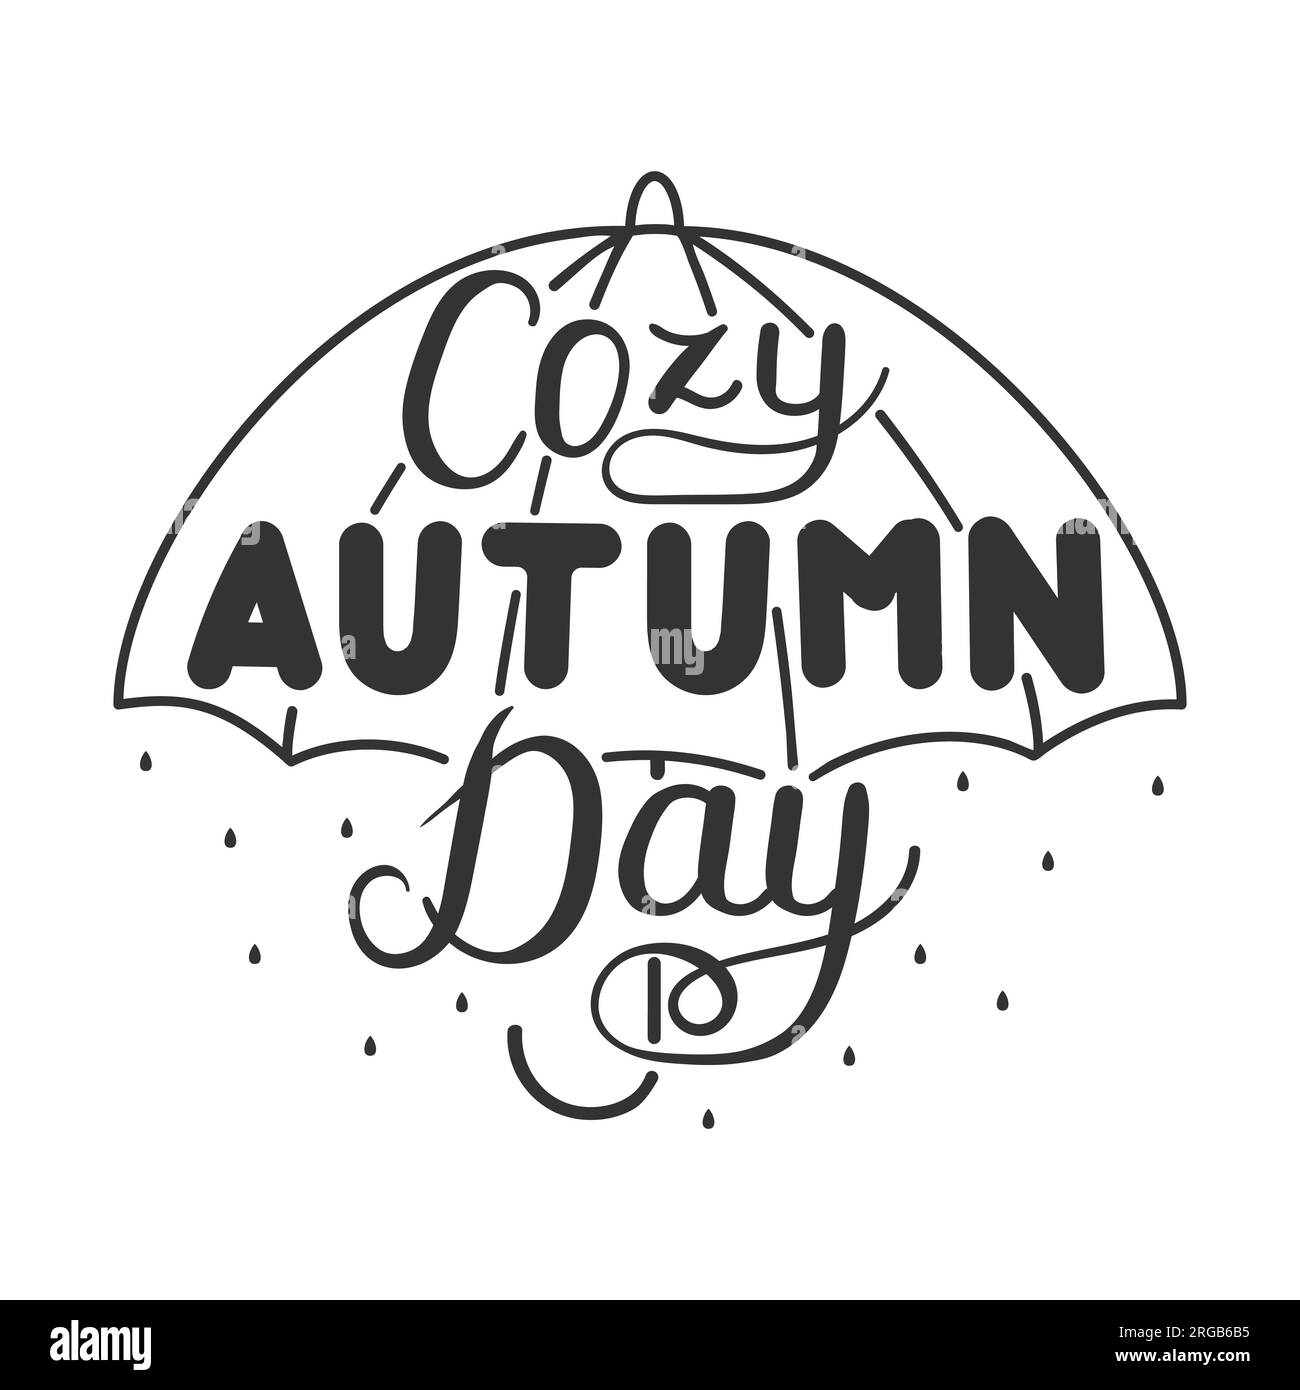 Vector illustration. The inscription Cozy autumn day, highlighted on a white background. Hand-drawn text with an inscription. Umbrella and rain. Stock Vector